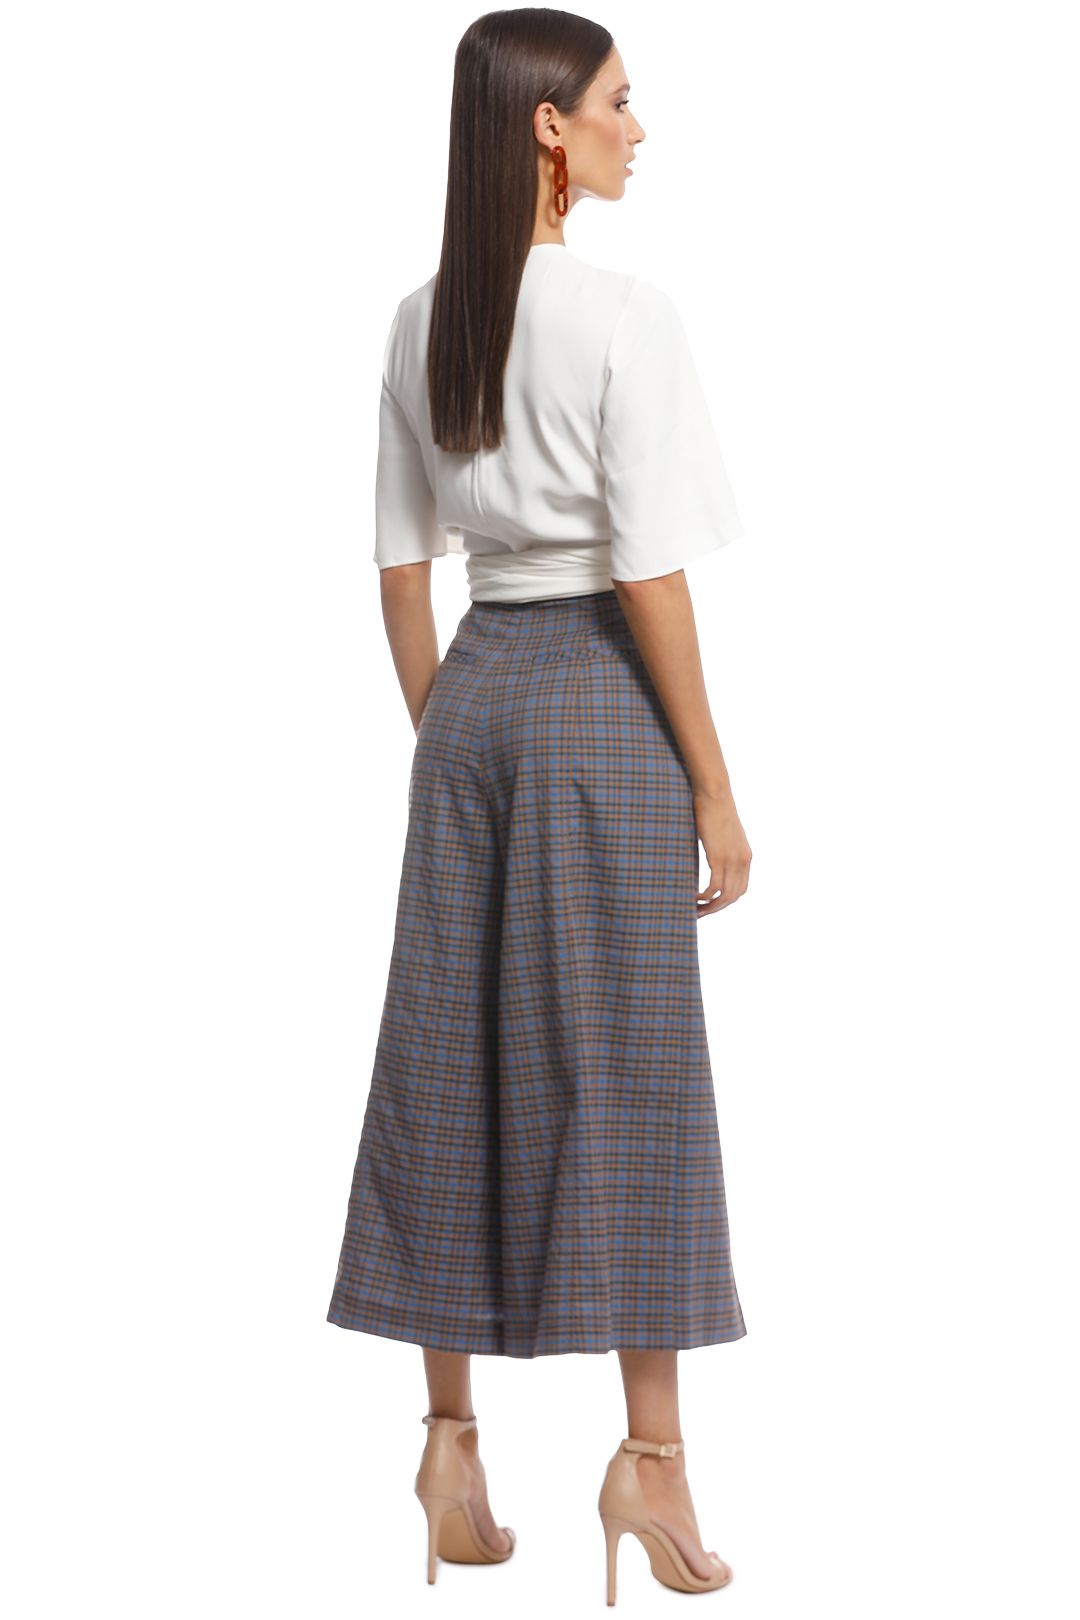 The East Order - Melody Pant - Blue Check - Back